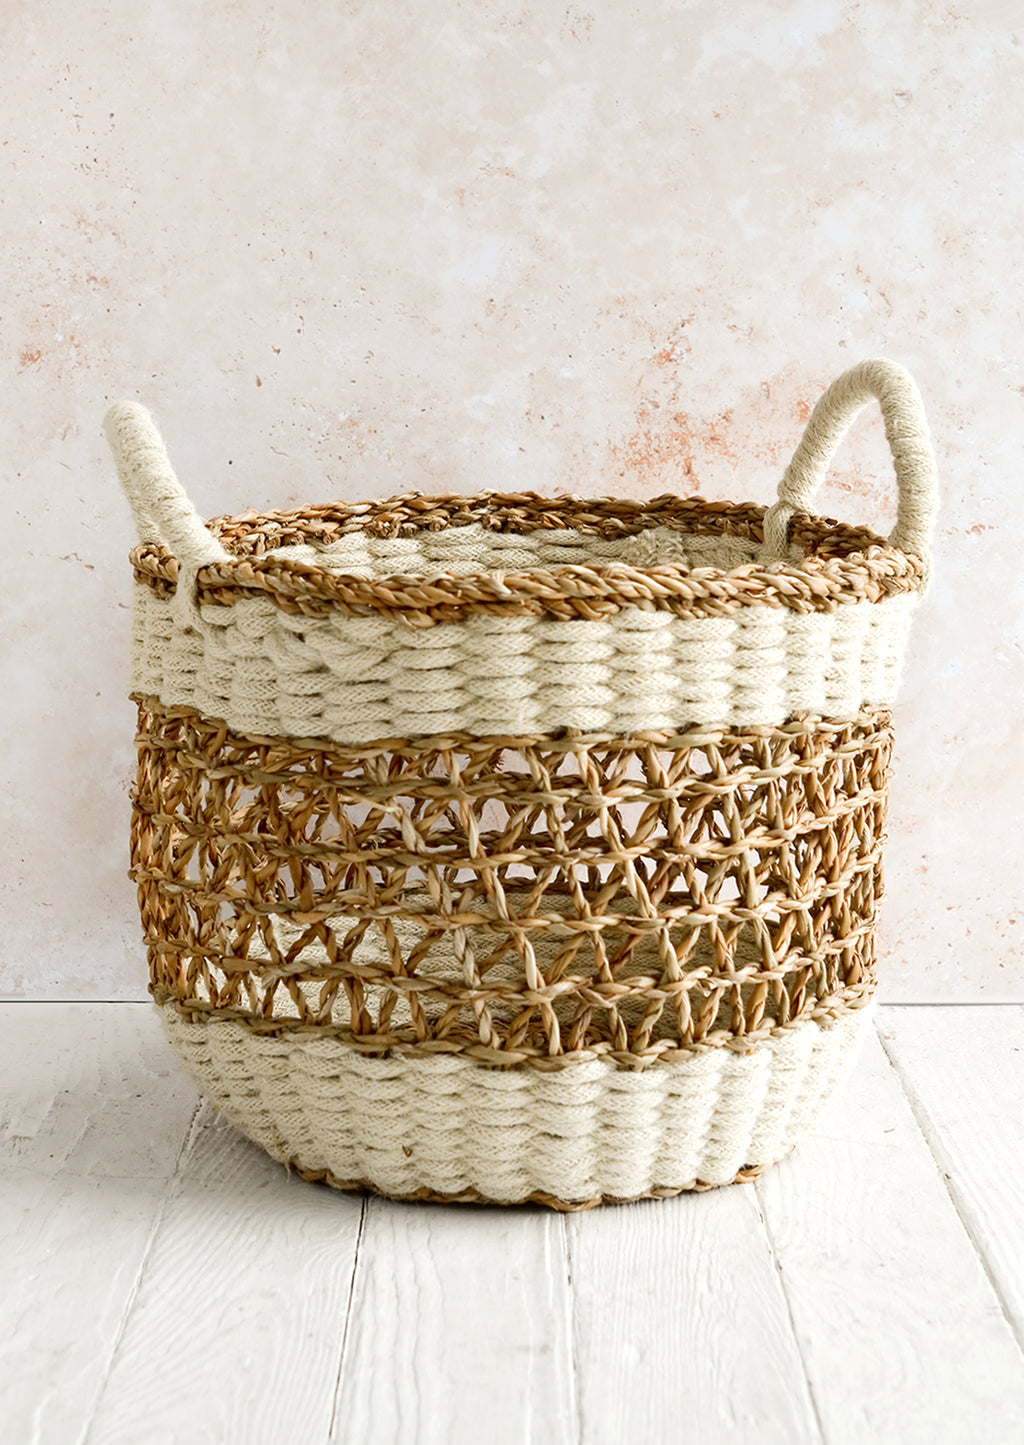 Medium [$85.00]: A medium open-top round storage basket made from seagrass with braided jute, featuring two handles at top.